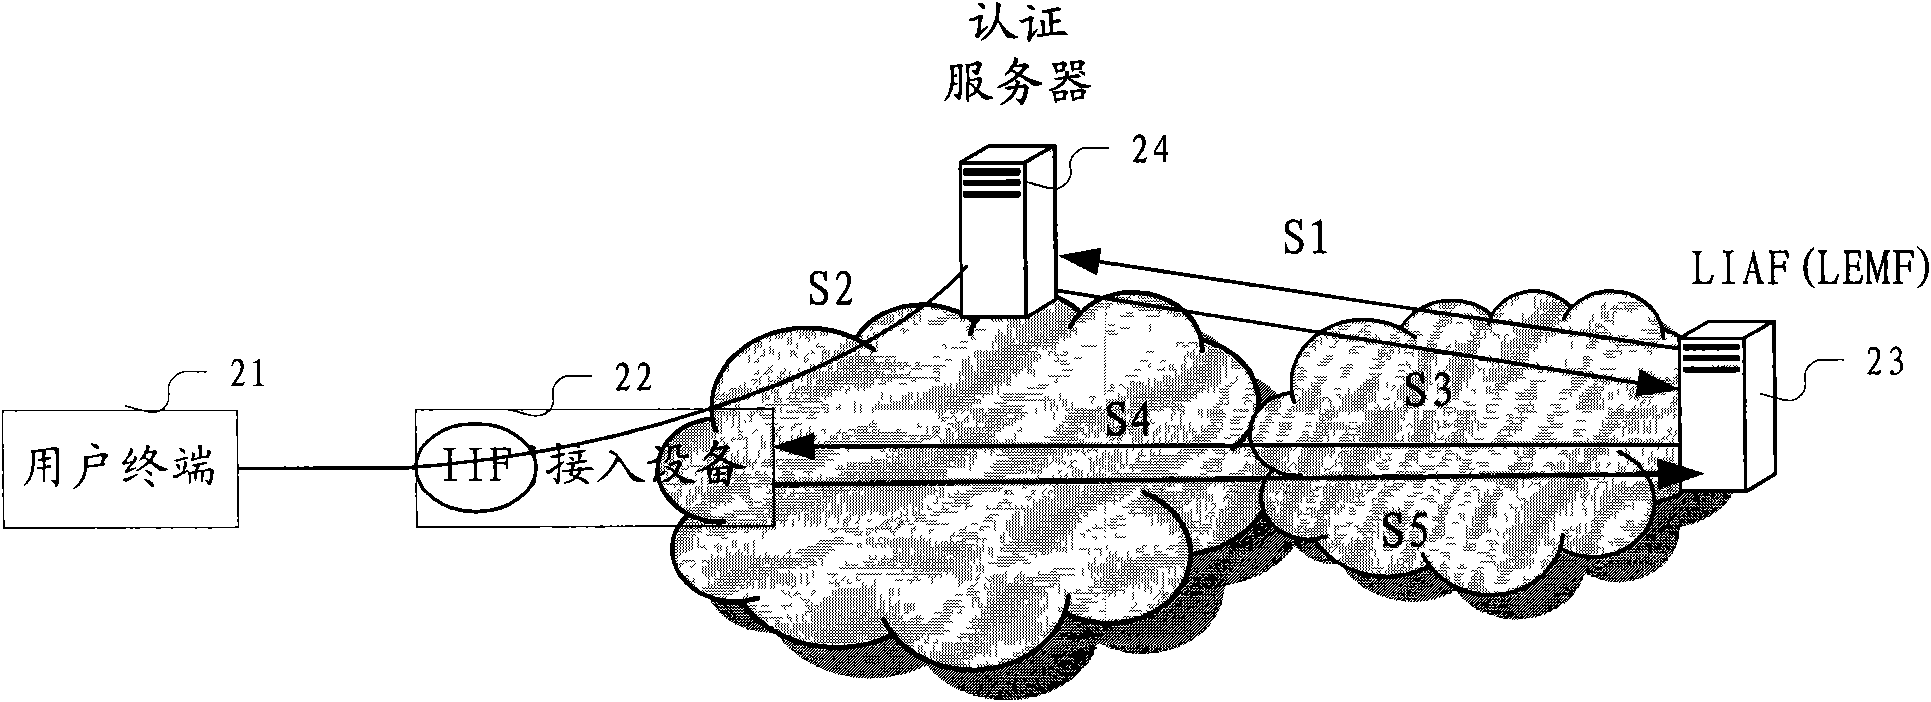 Method and device for realizing internet lawful interception